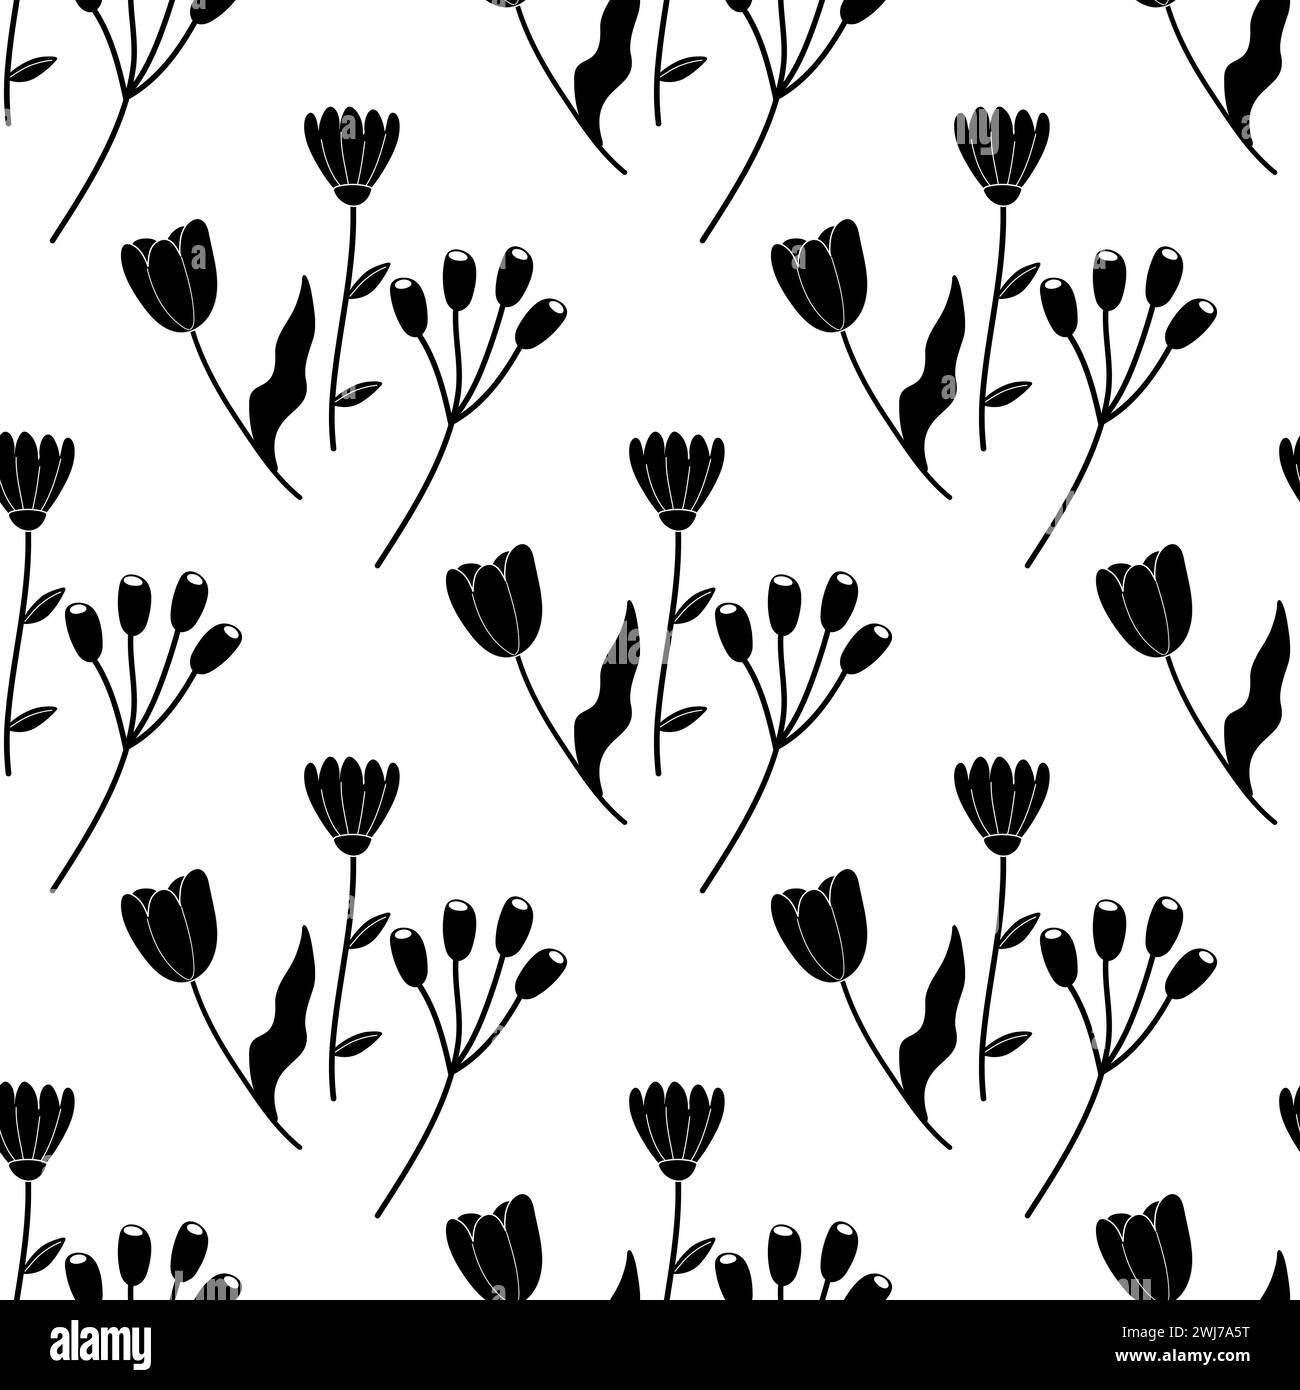 Seamless floral spring flowers silhouettes black white illustration. For your design, wrapping paper, fabric. Stock Vector